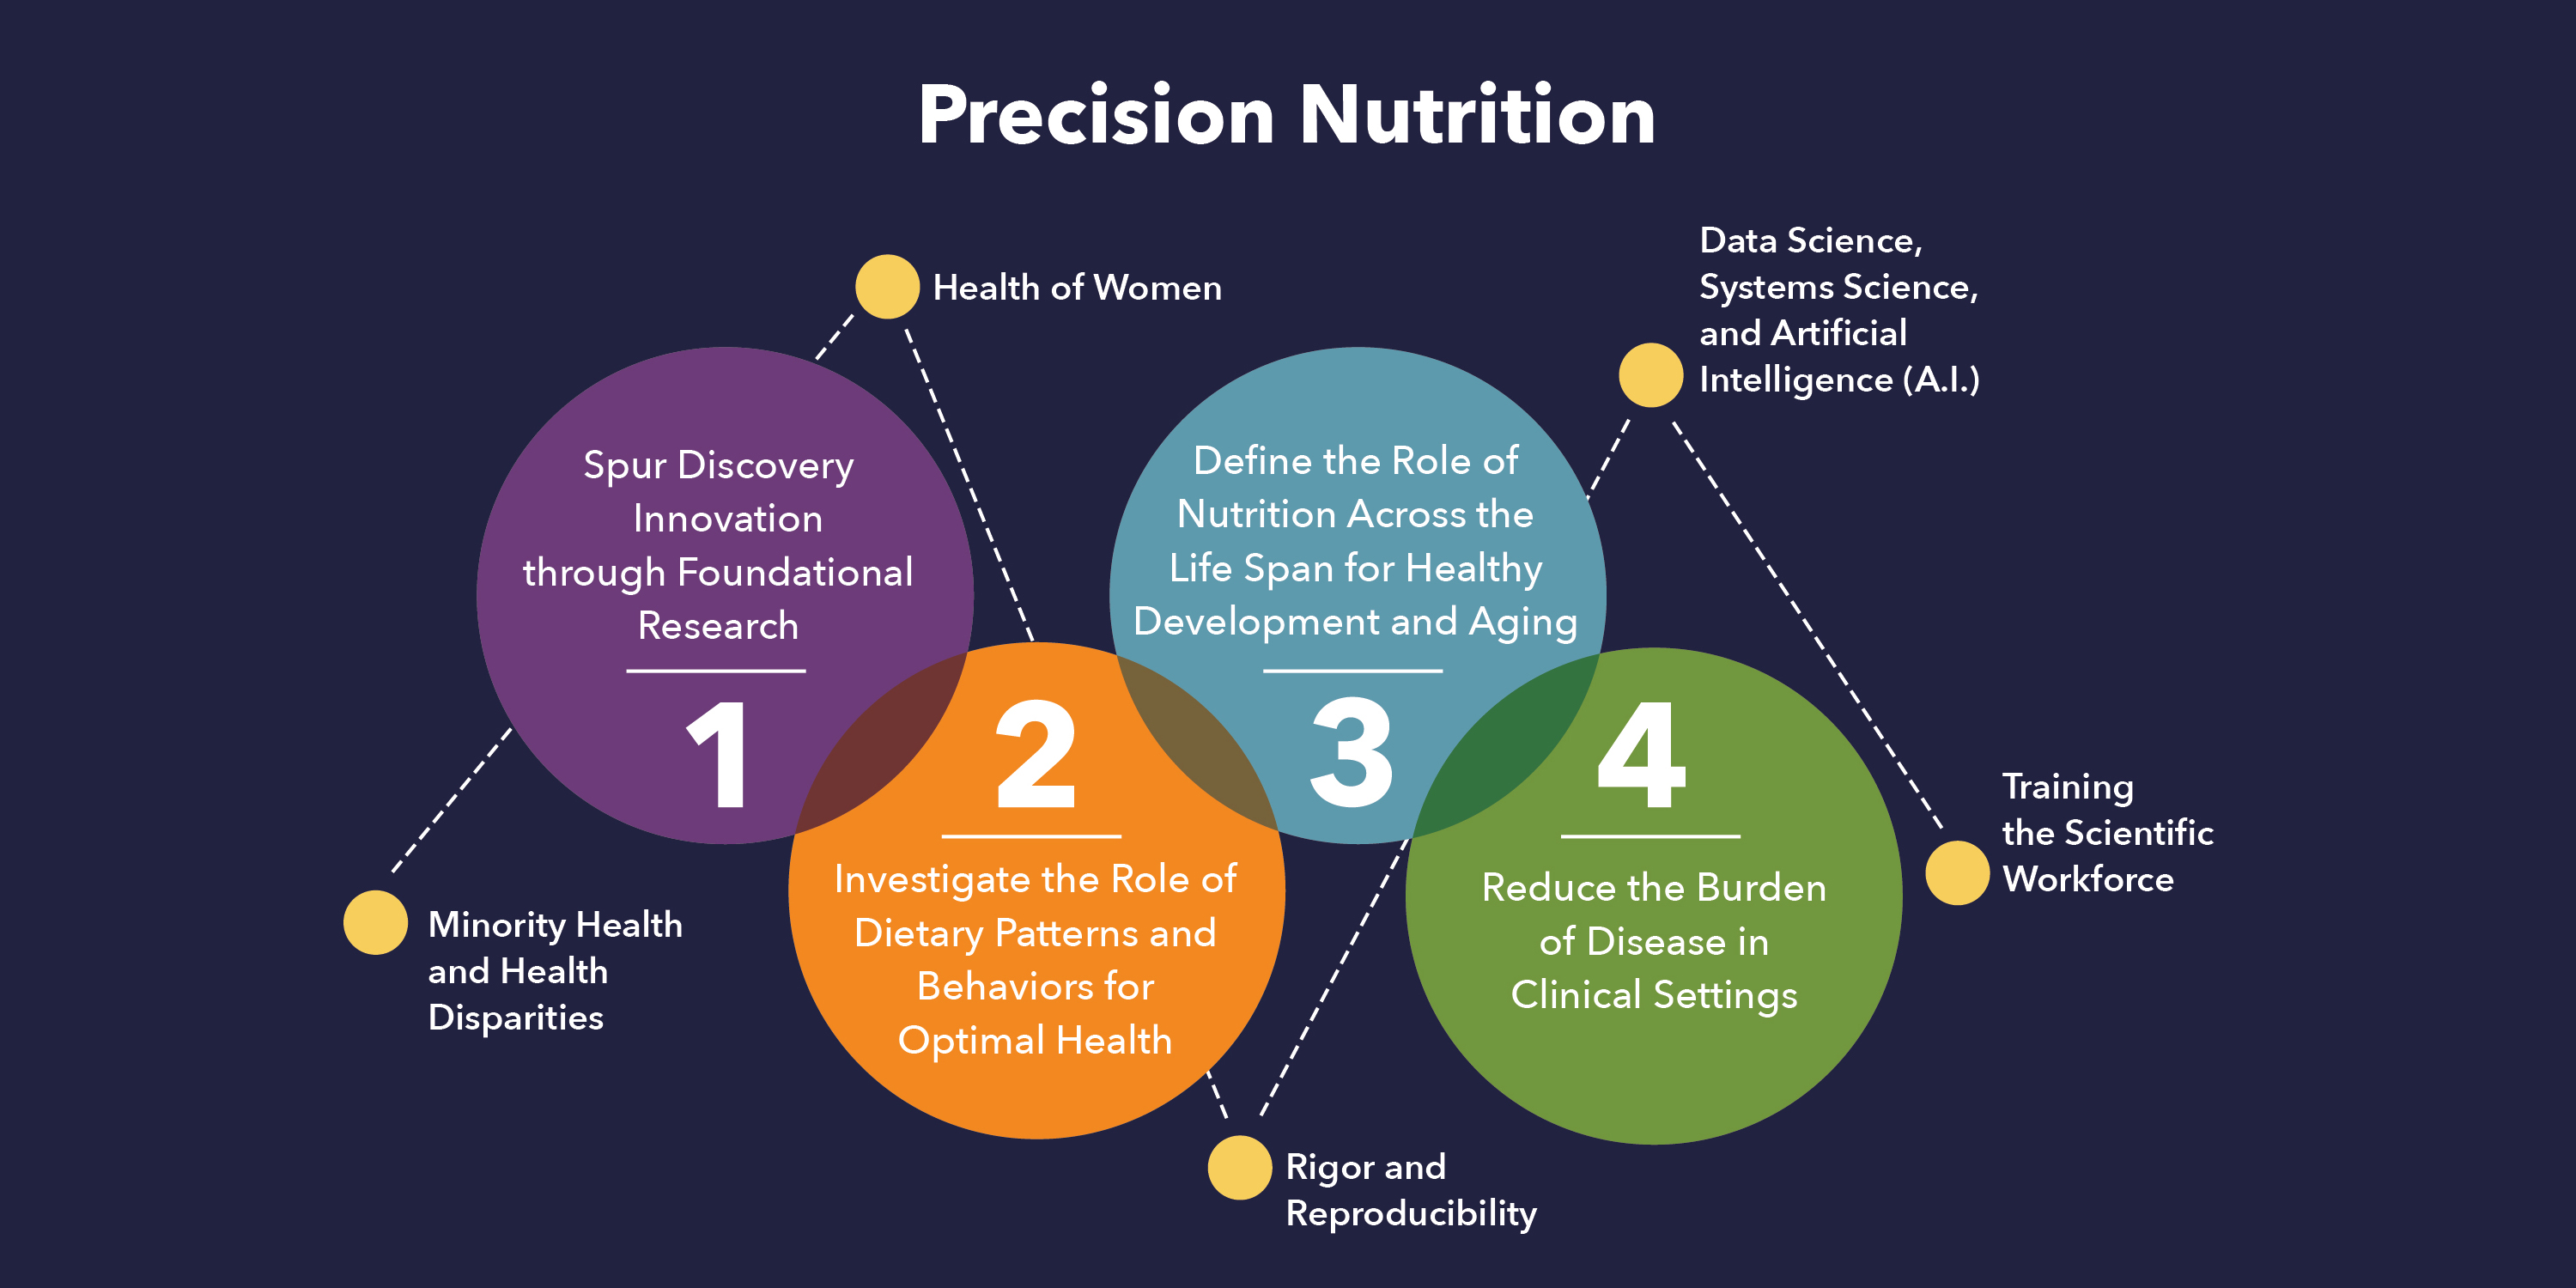 Image depicting that the 2020-2030 Strategic Plan for NIH Nutrition Research is organized around a central unifying vision of Precision Nutrition research. Progress in each of the Plan’s four Strategic Goals, as well as the five Cross-Cutting Research Areas, are essential to achieve this vision.